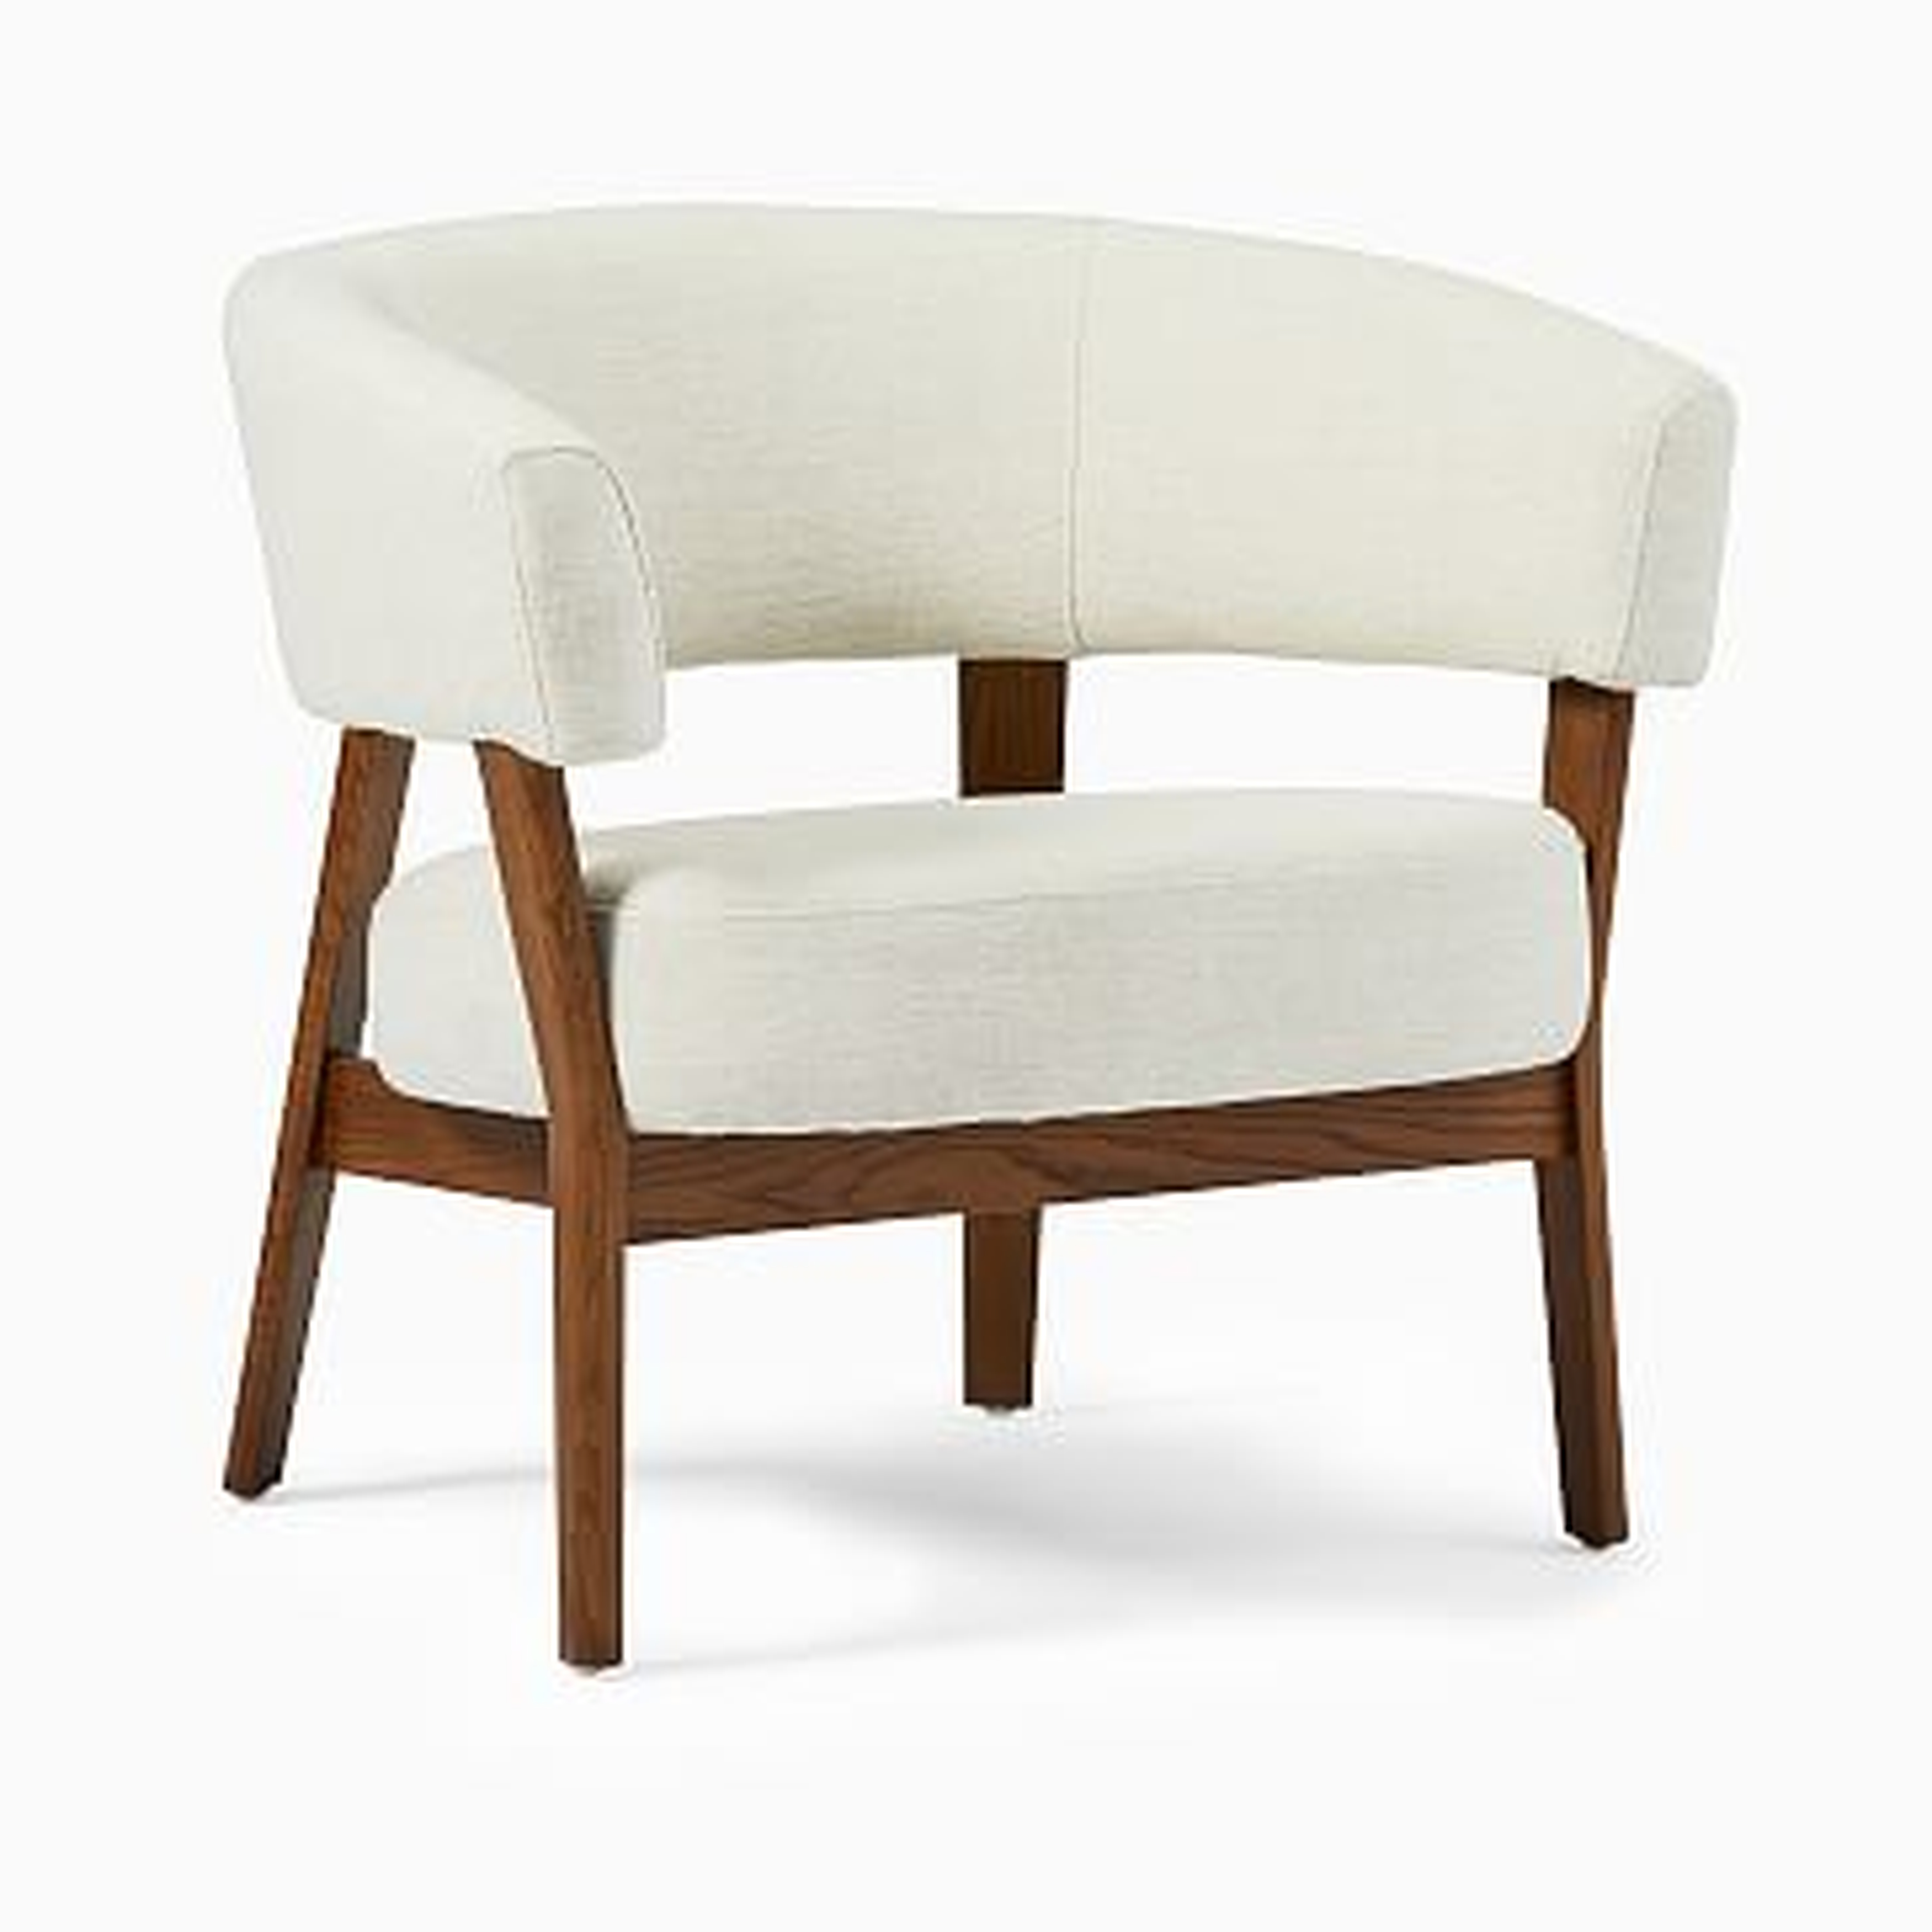 Juno Chair, Poly, Sand Twill, Natural Oak legs - West Elm